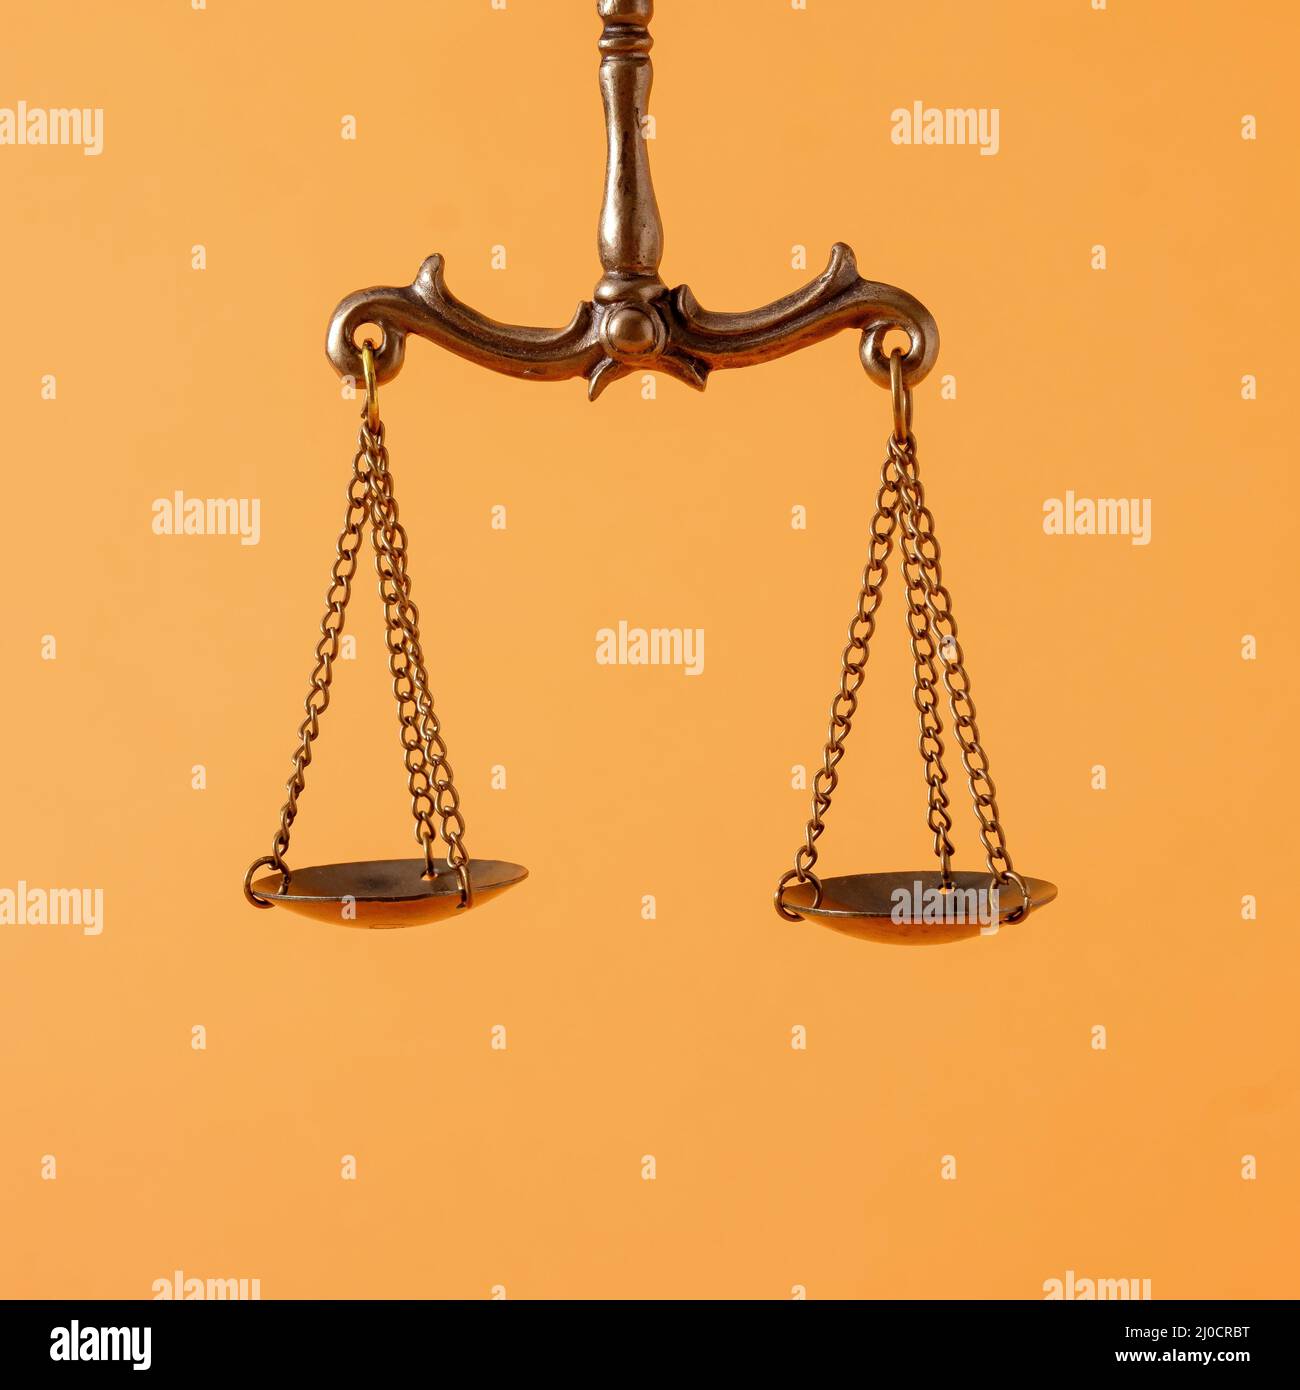 https://c8.alamy.com/comp/2J0CRBT/pendulum-scales-over-an-orange-background-with-copy-space-in-a-concept-of-law-enforcement-and-justice-2J0CRBT.jpg